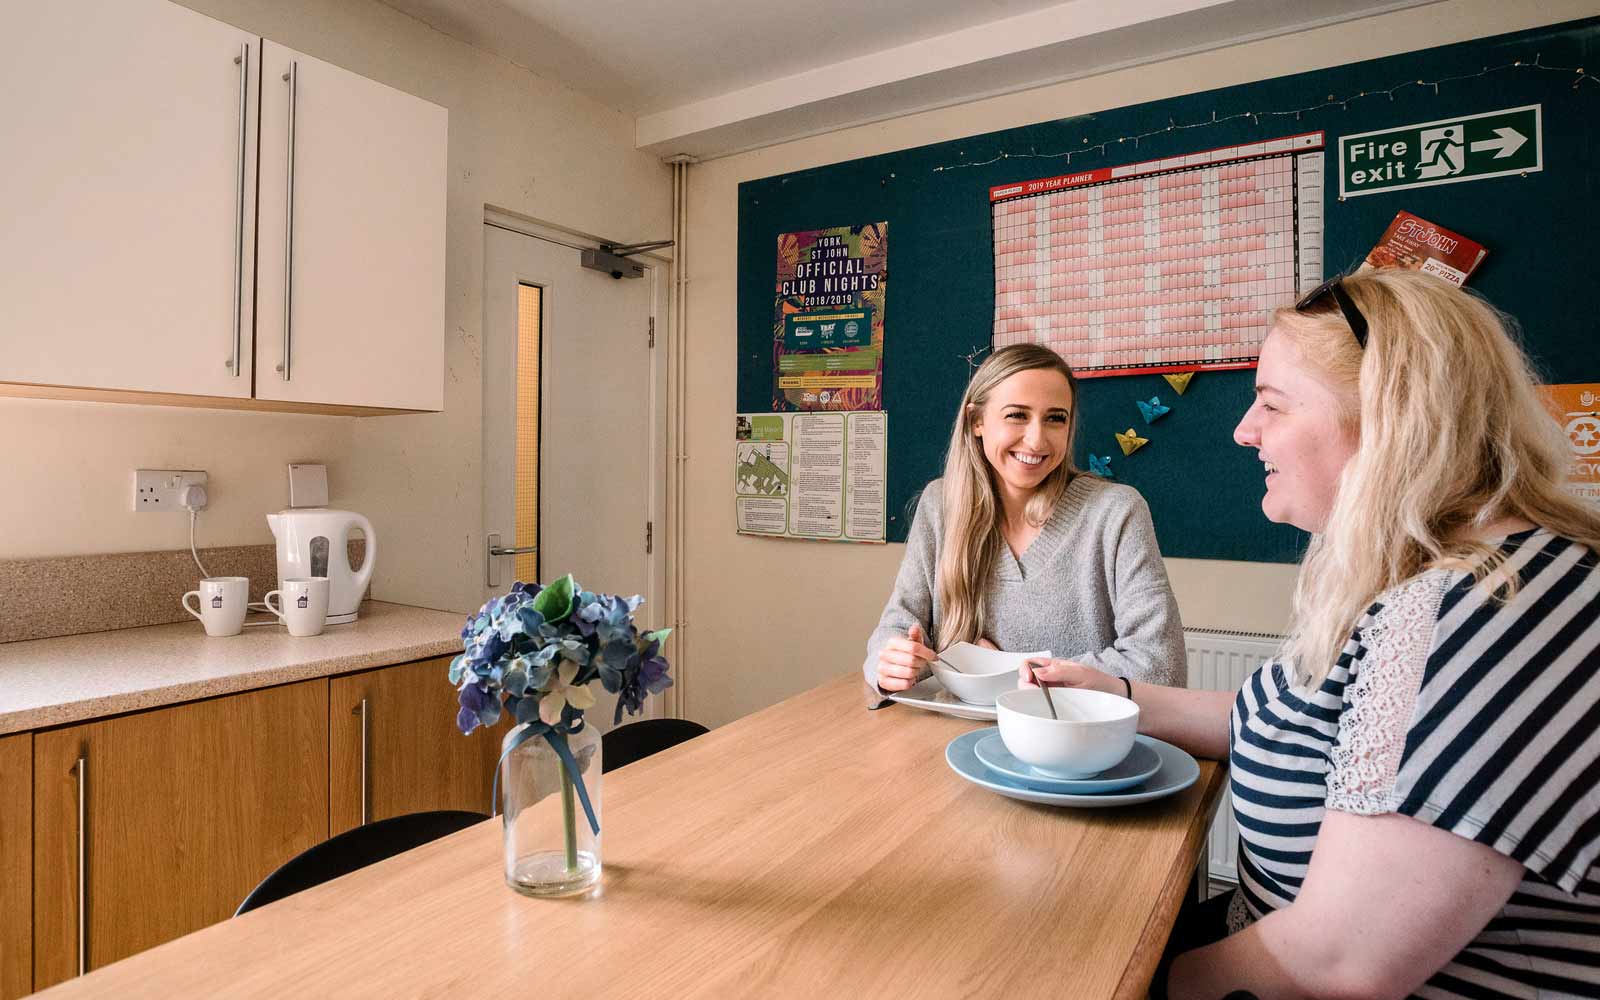 Two students chat in a student accommodation site kitchen.